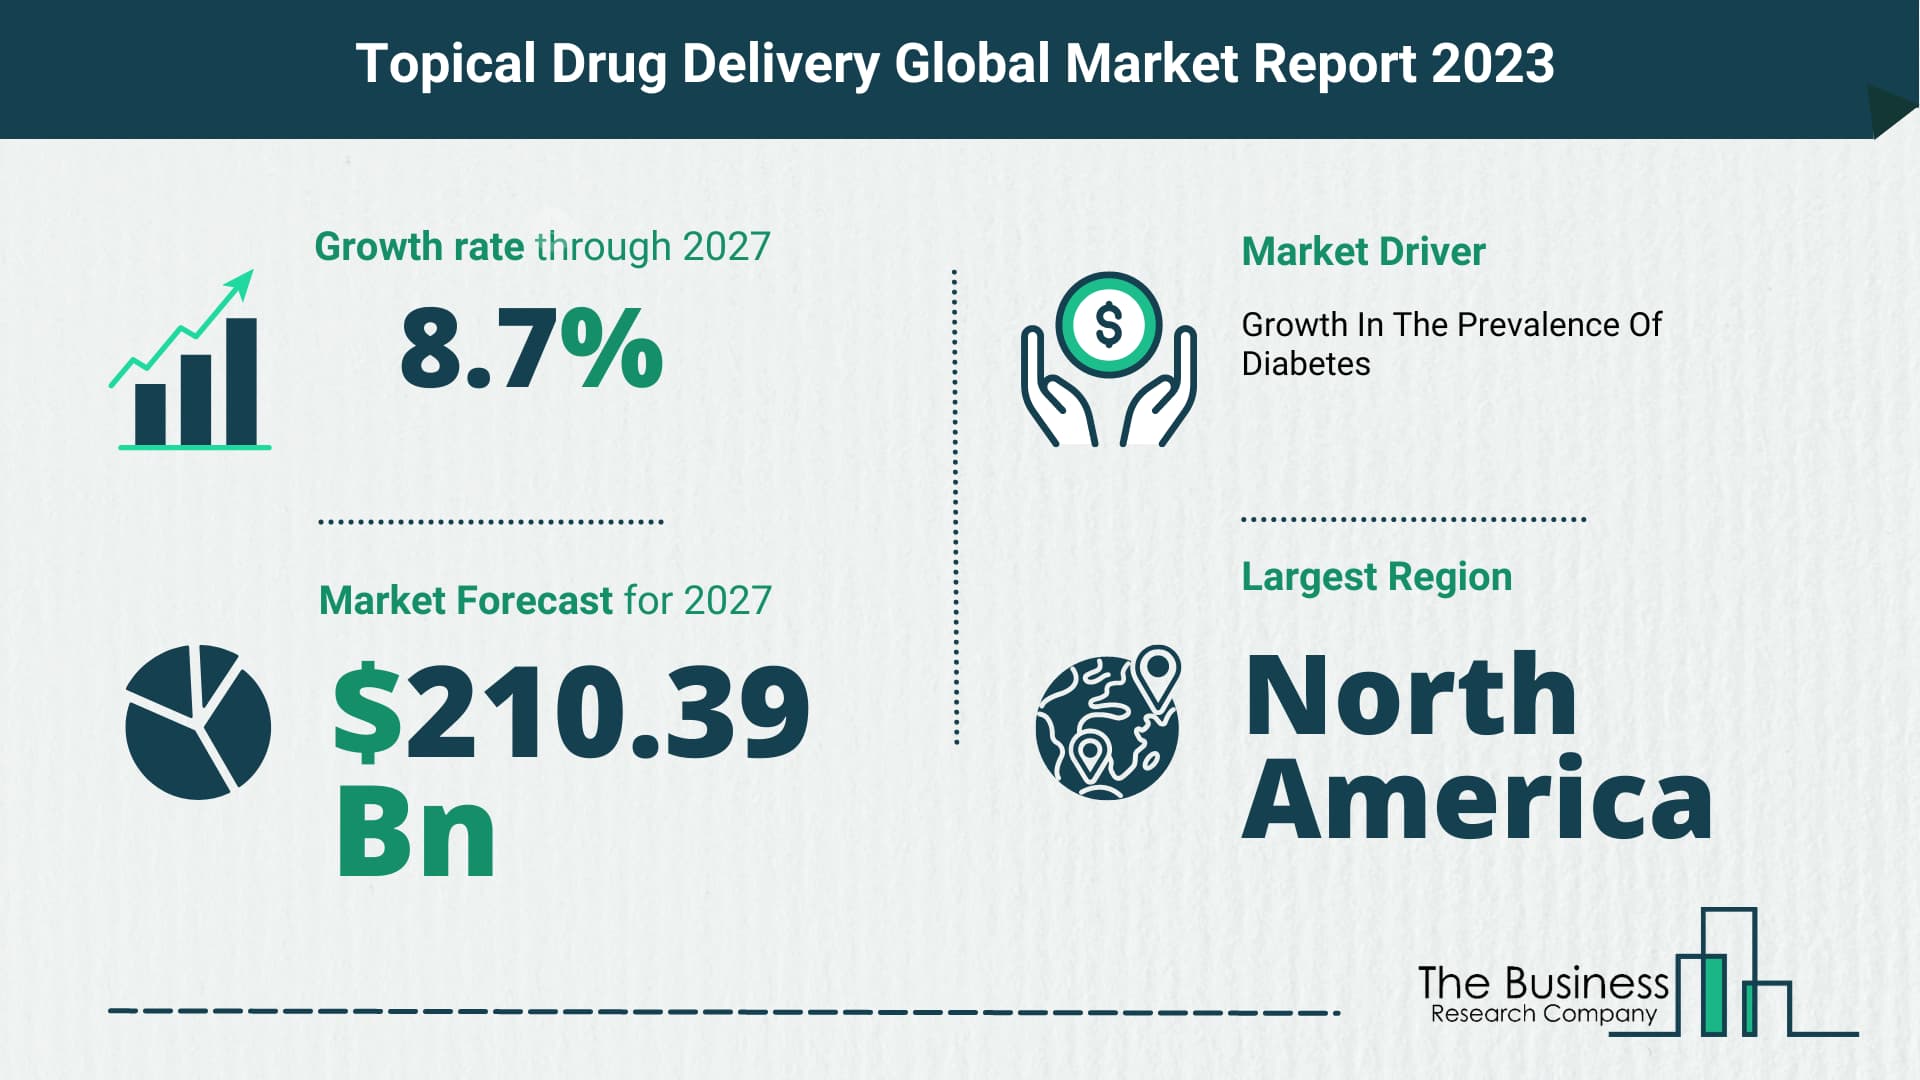 Global Topical Drug Delivery Market Opportunities And Strategies 2023